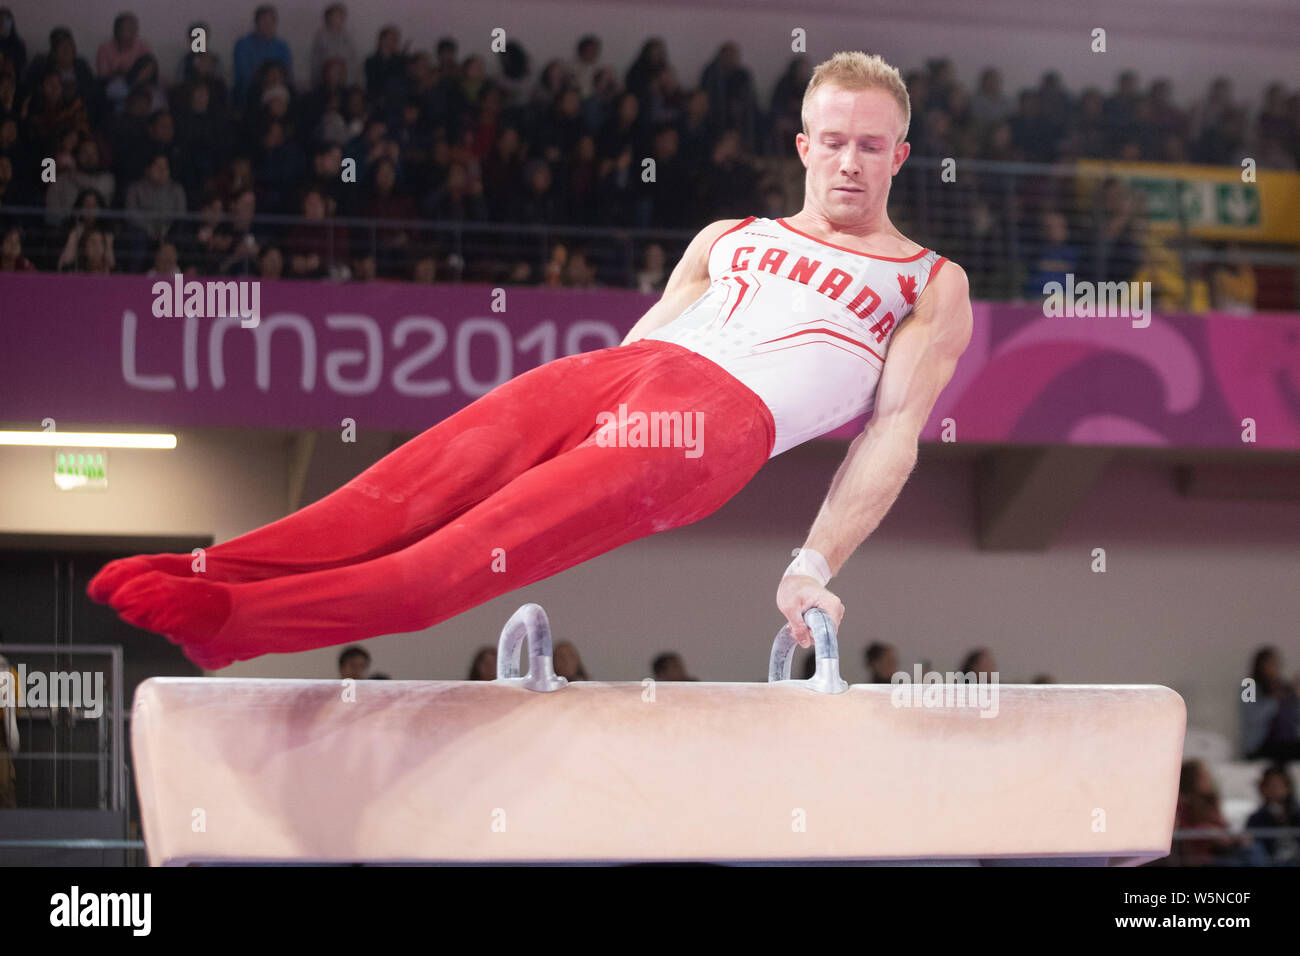 Lima, Peru. 28th July, 2019. Cory Paterson (#85) of Canada performs on pommel horse during the Pan American Games Artistic Gymnastics, Men's Team Qualification and Final at Polideportivo Villa el Salvador in Lima, Peru. Daniel Lea/CSM/Alamy Live News Stock Photo